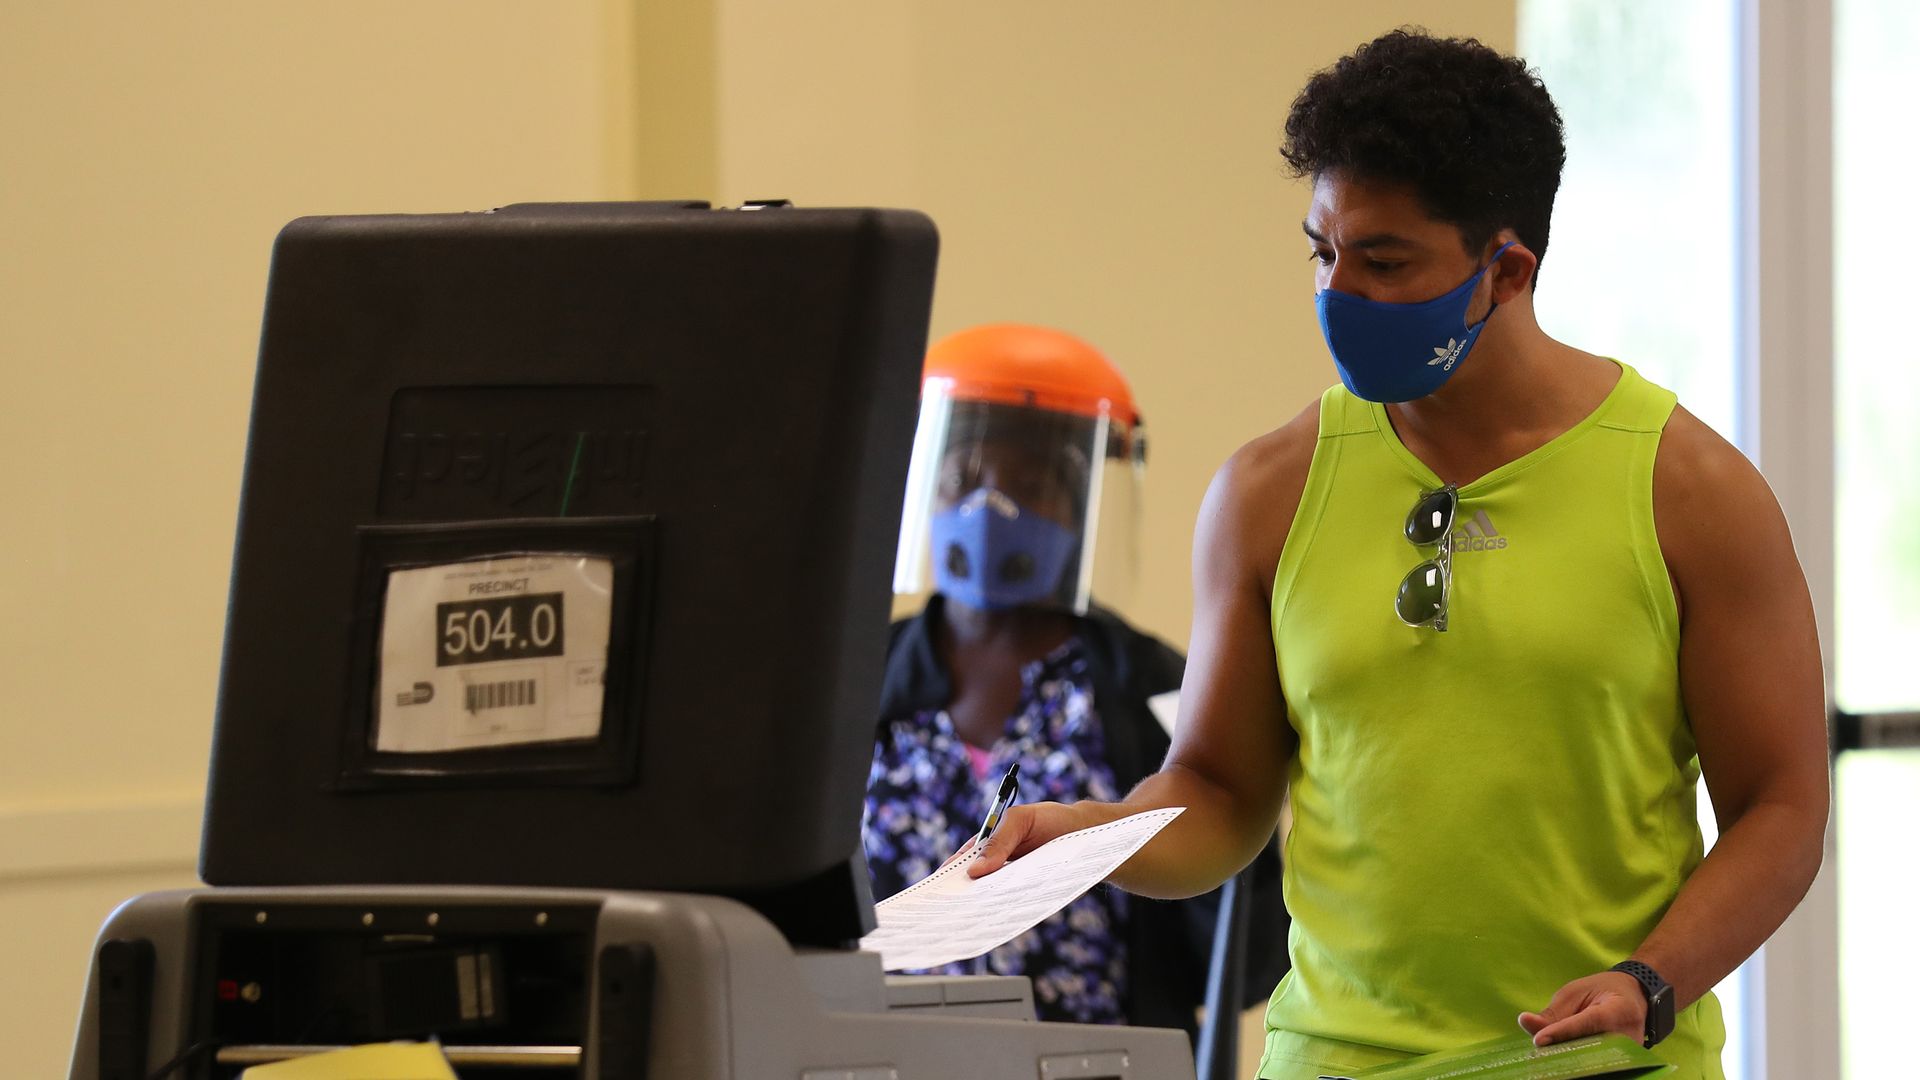 A citizen casting their vote in Miami on Tuesday. Photo: Joe Raedle/Getty Images